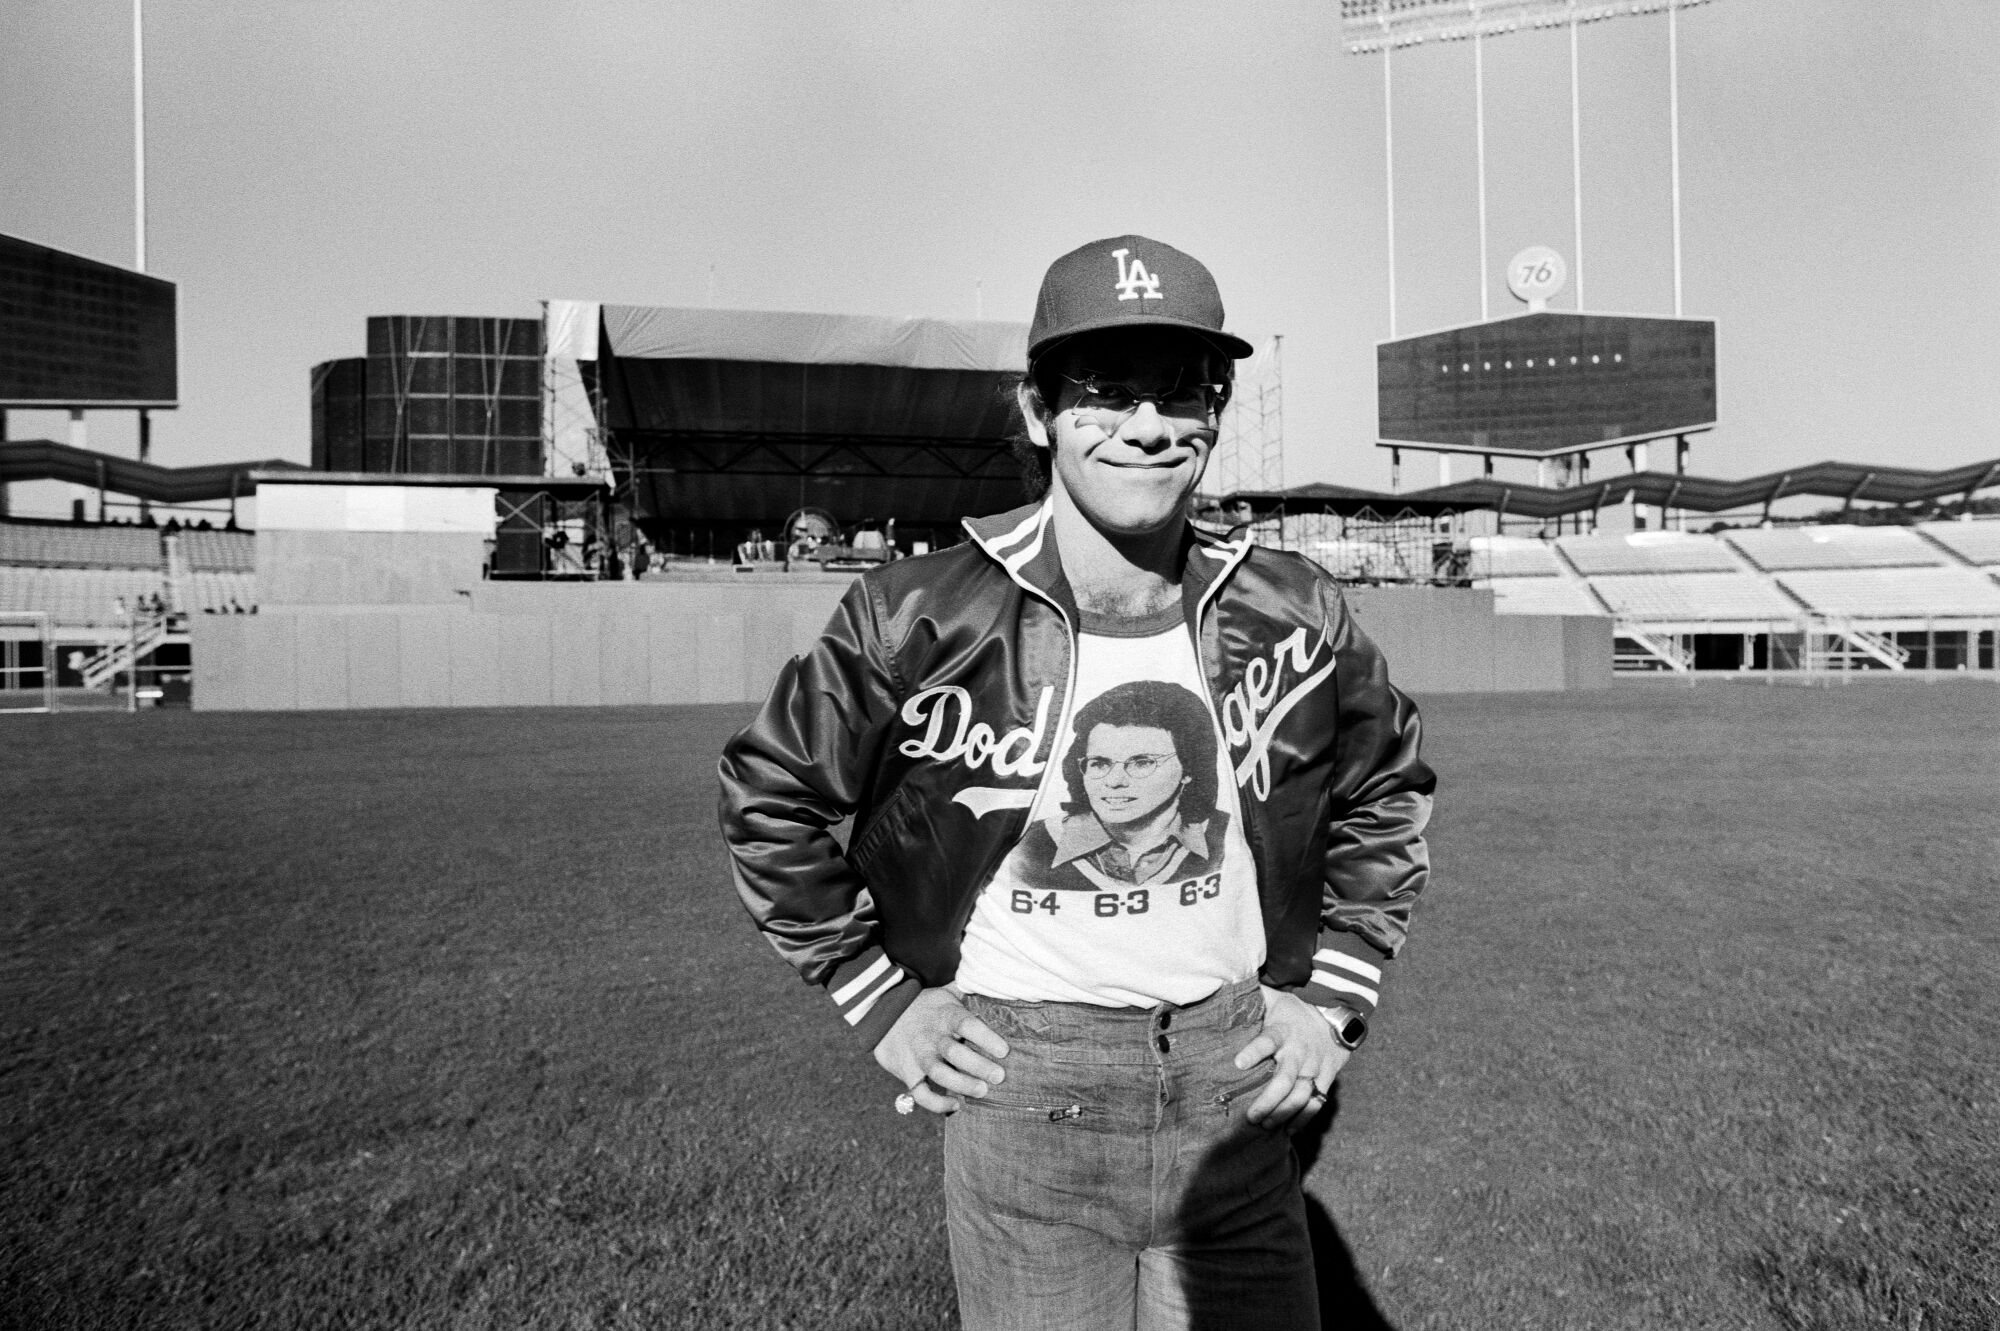 A man in an LA Dodgers cap and jacket stands on an empty stadium baseball field.